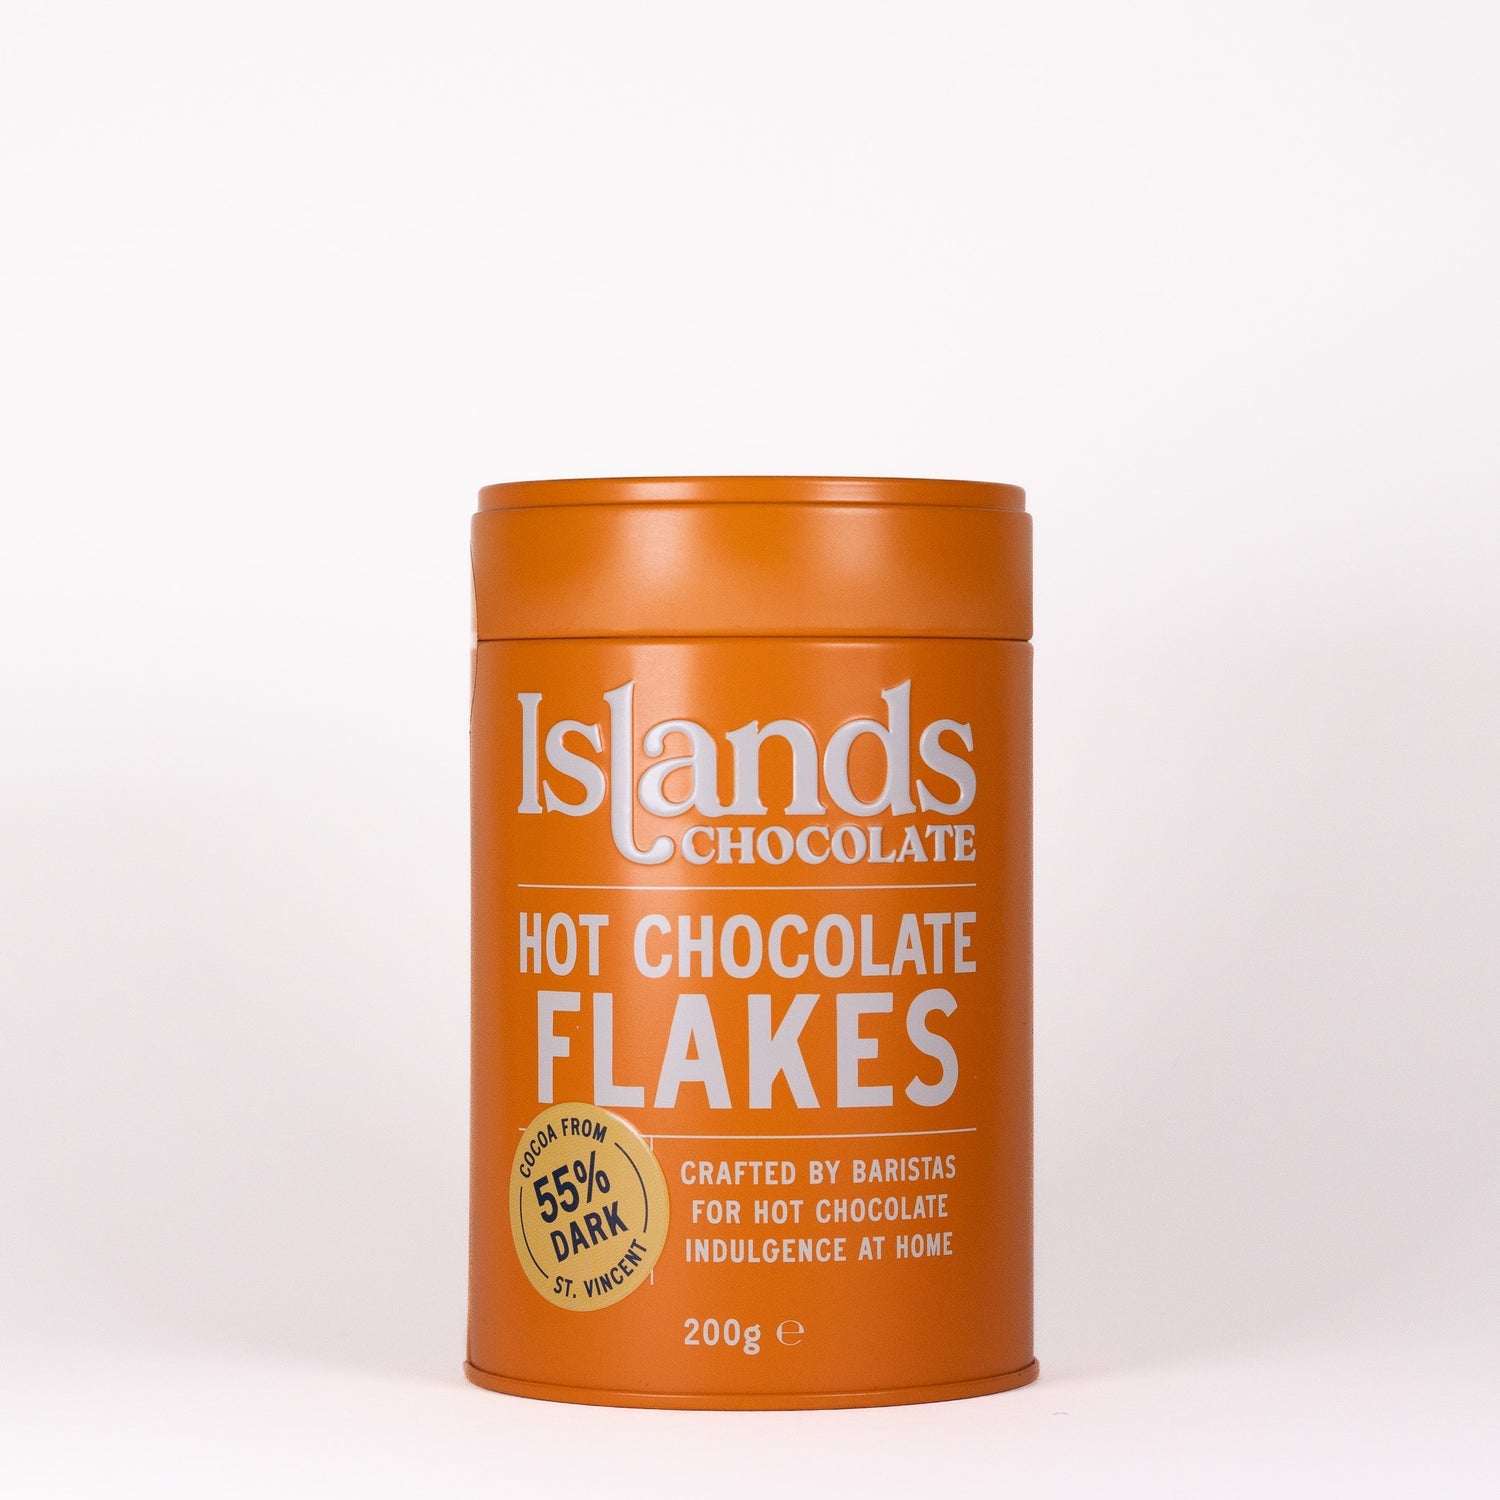 Meet Our Partners, Islands Chocolate